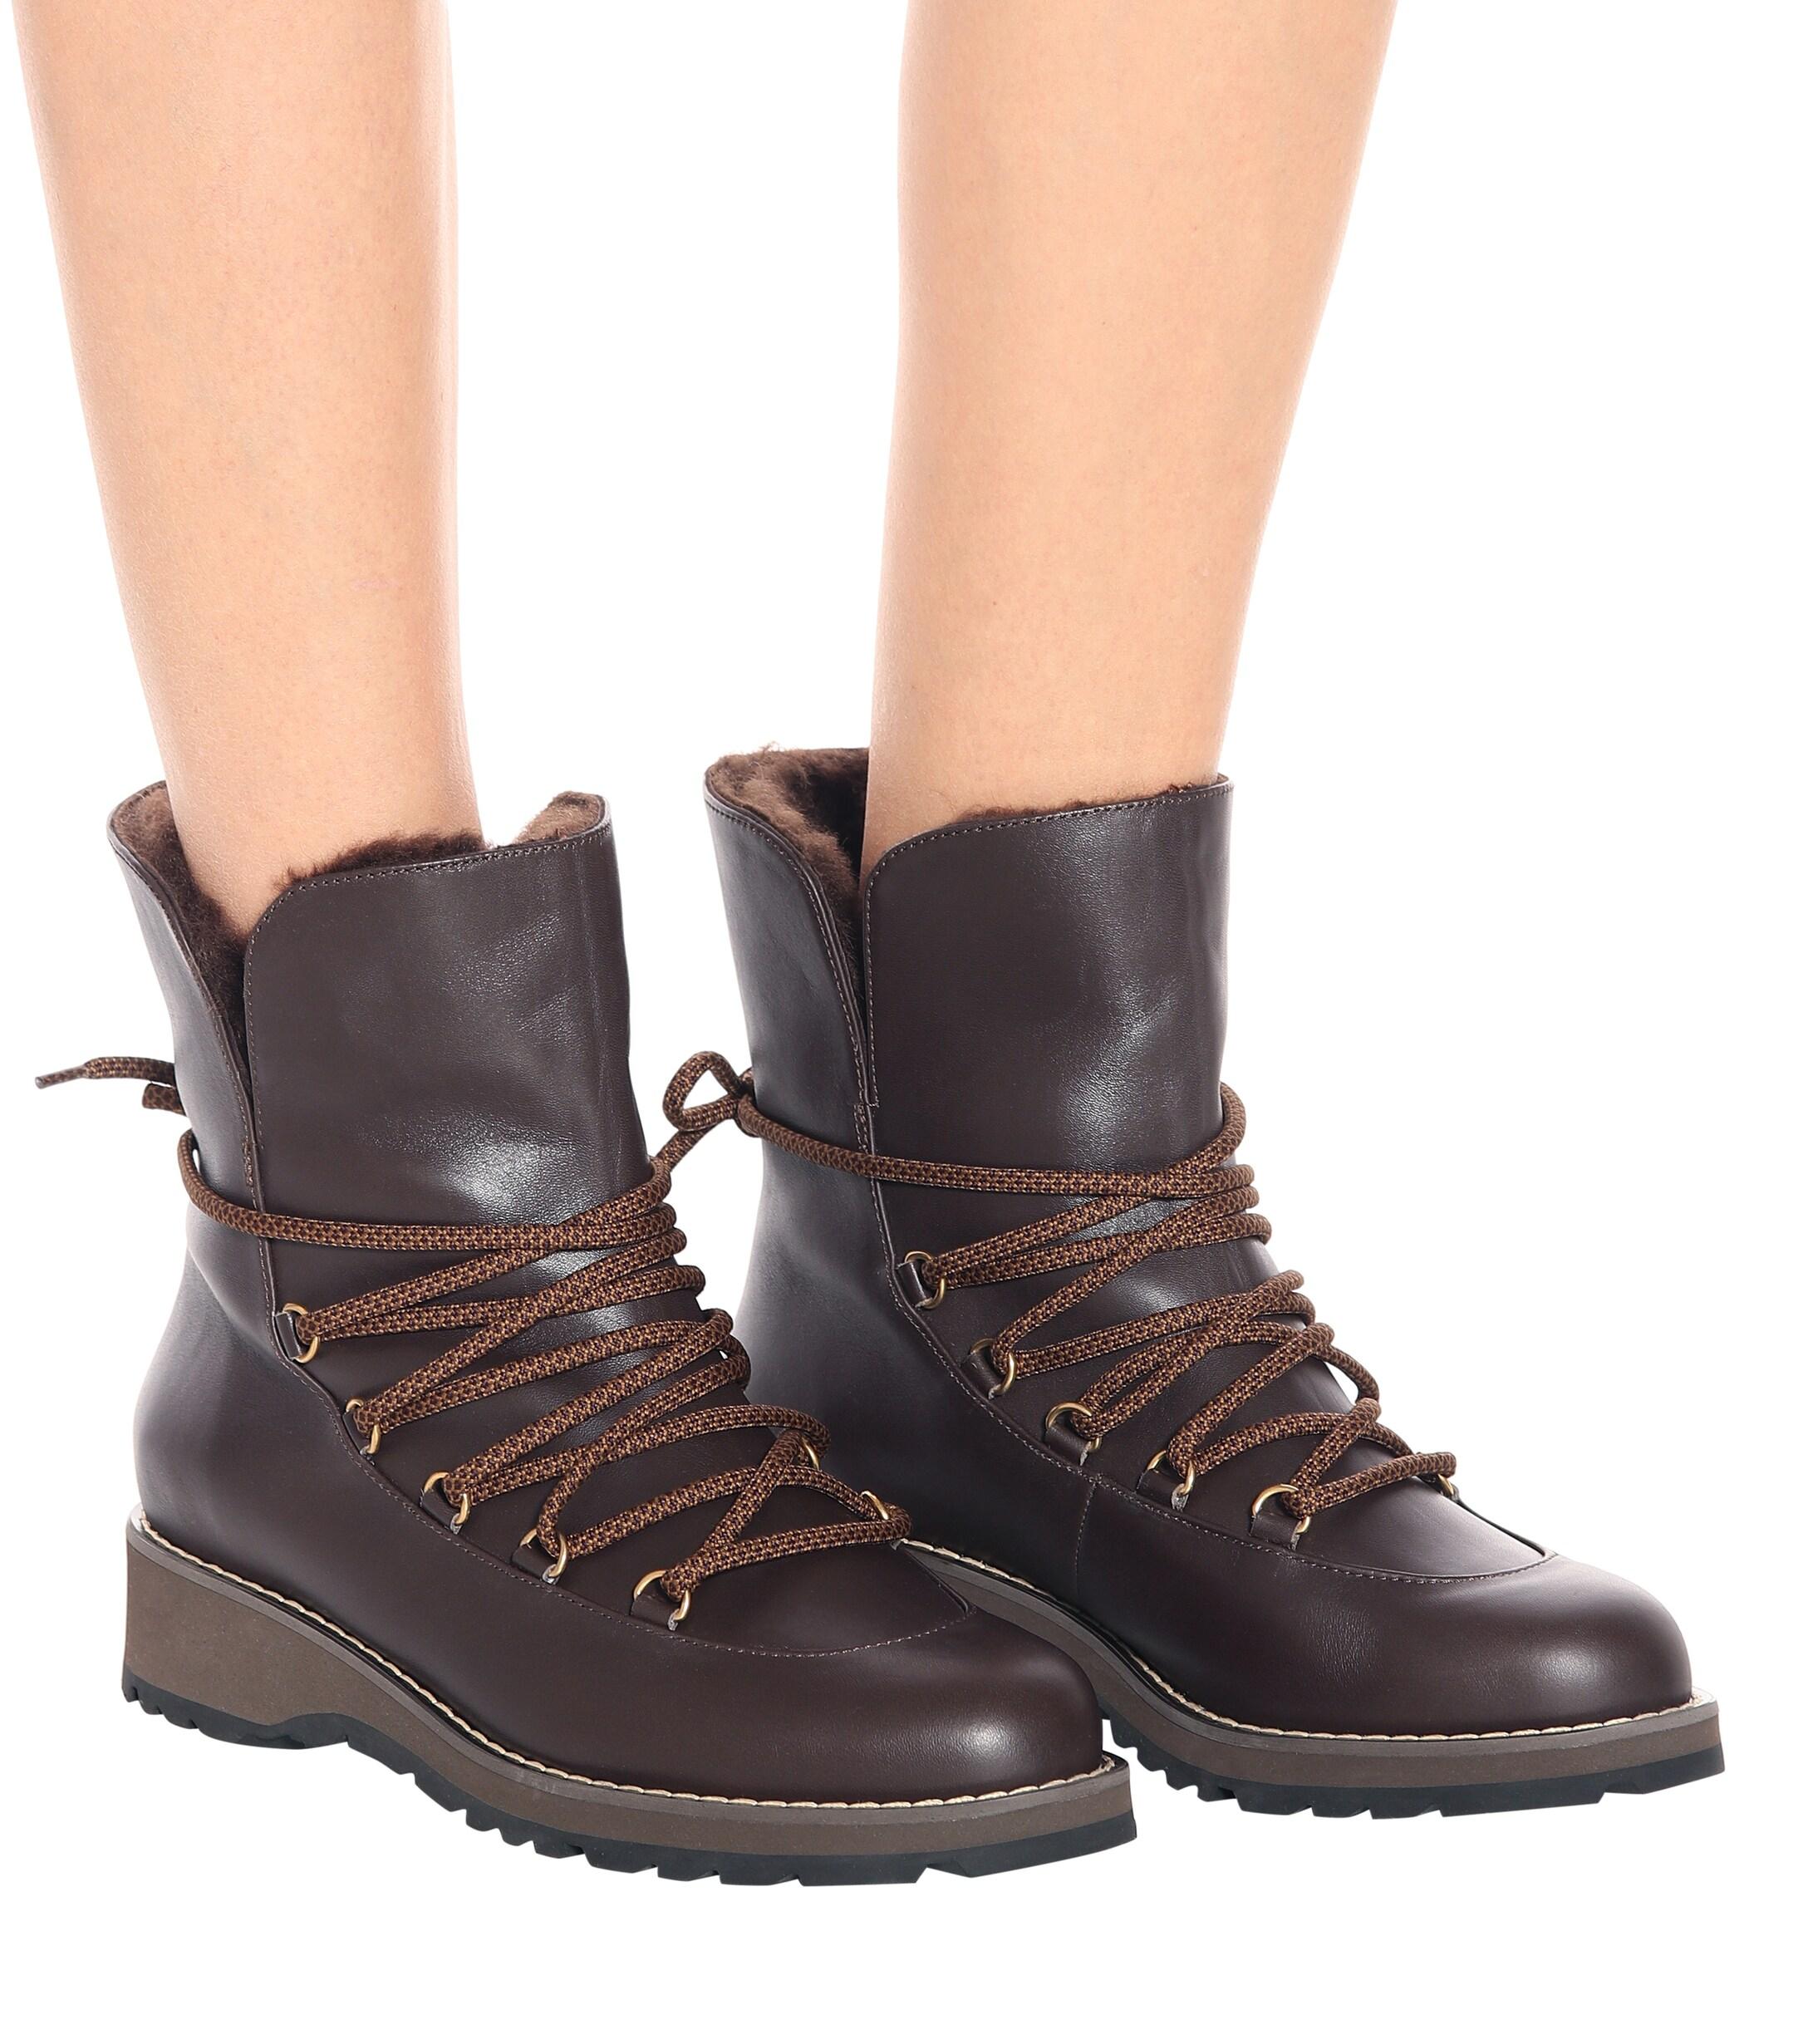 Max Mara Calle Leather Ankle Boots in Dark Brown (Brown) - Lyst